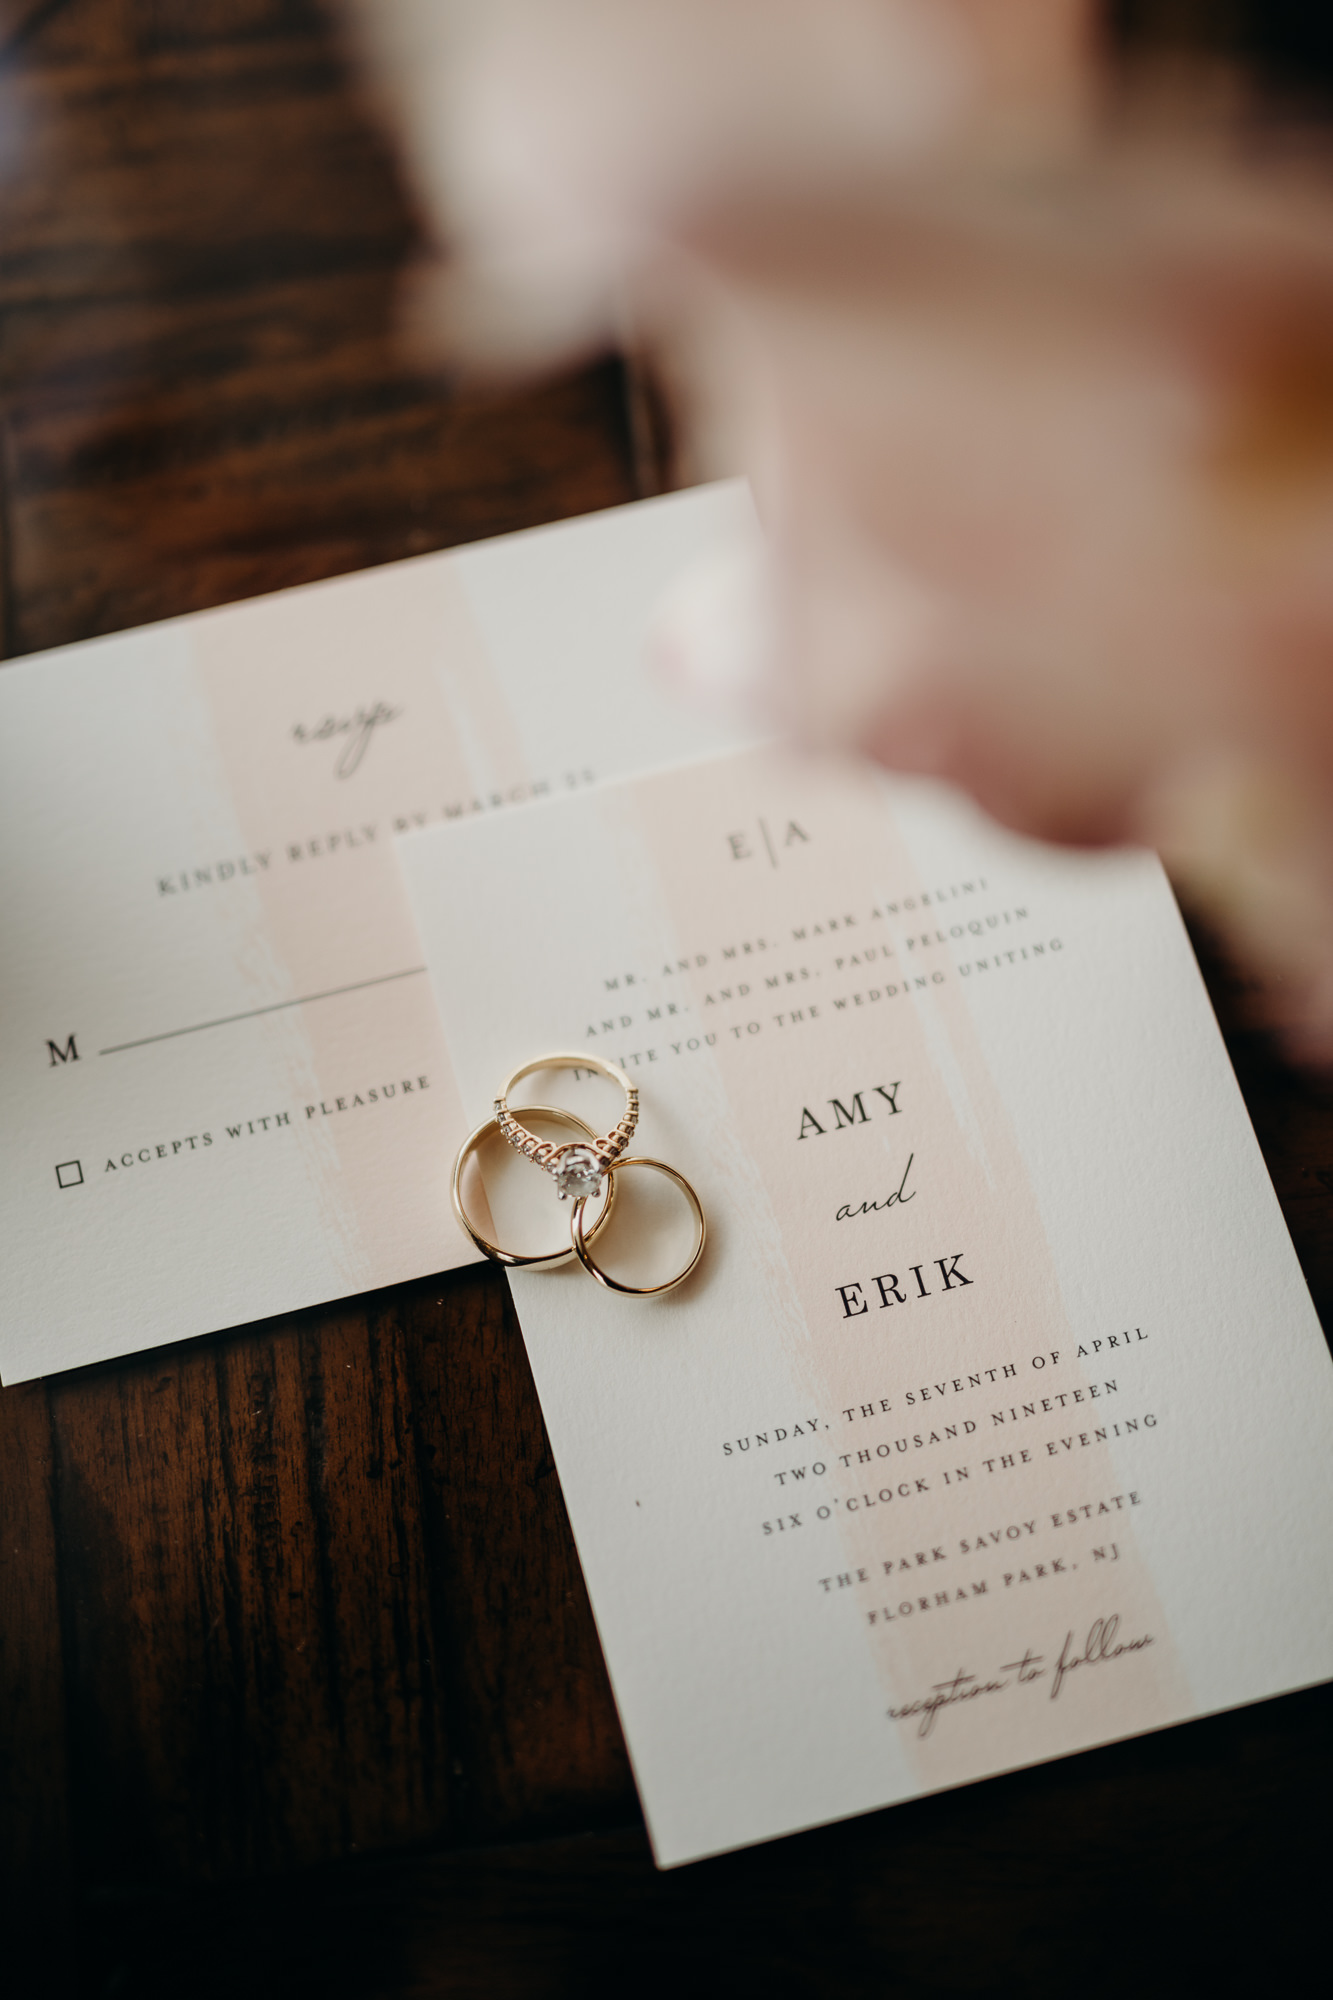 wedding bands and invitations at the park savoy in florham park, new jersey